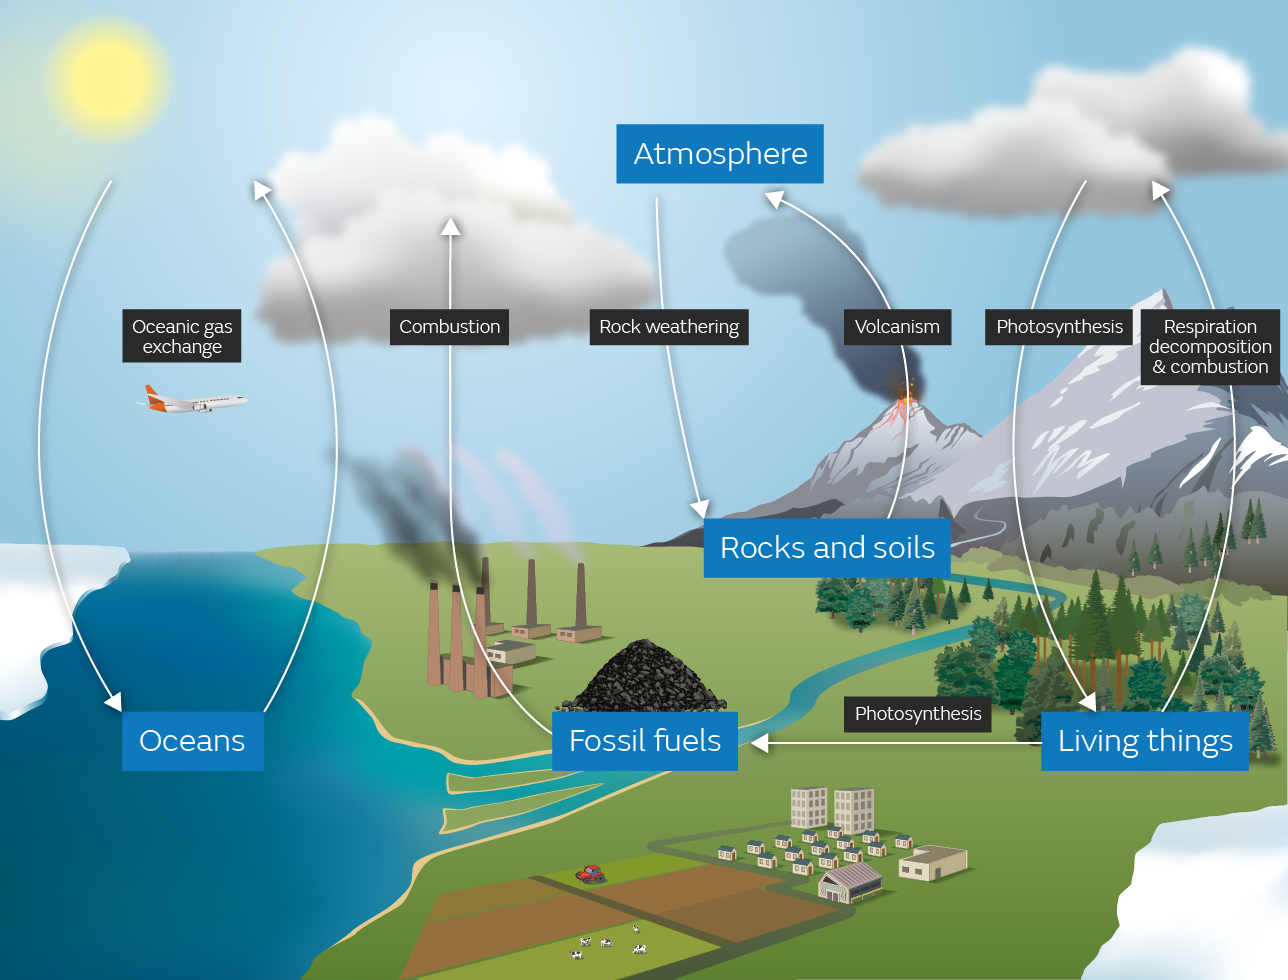 A simplified schematic of the global carbon cycle, showing the movement of carbon between different reservoirs and the processes involved.